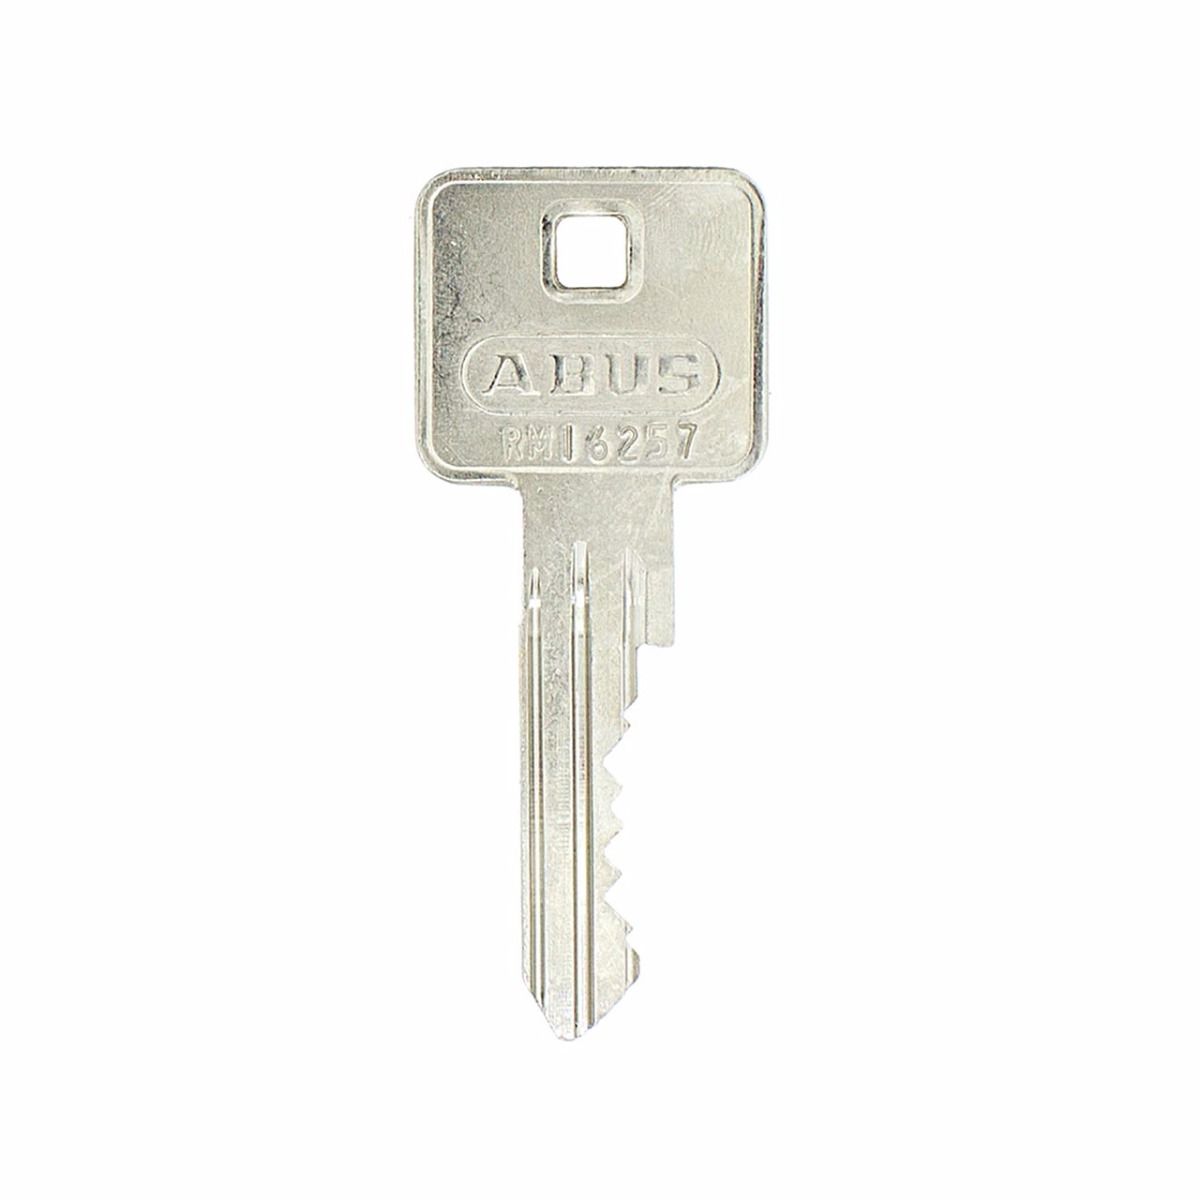 Additional Key For ABUS E60 Range of cylinders